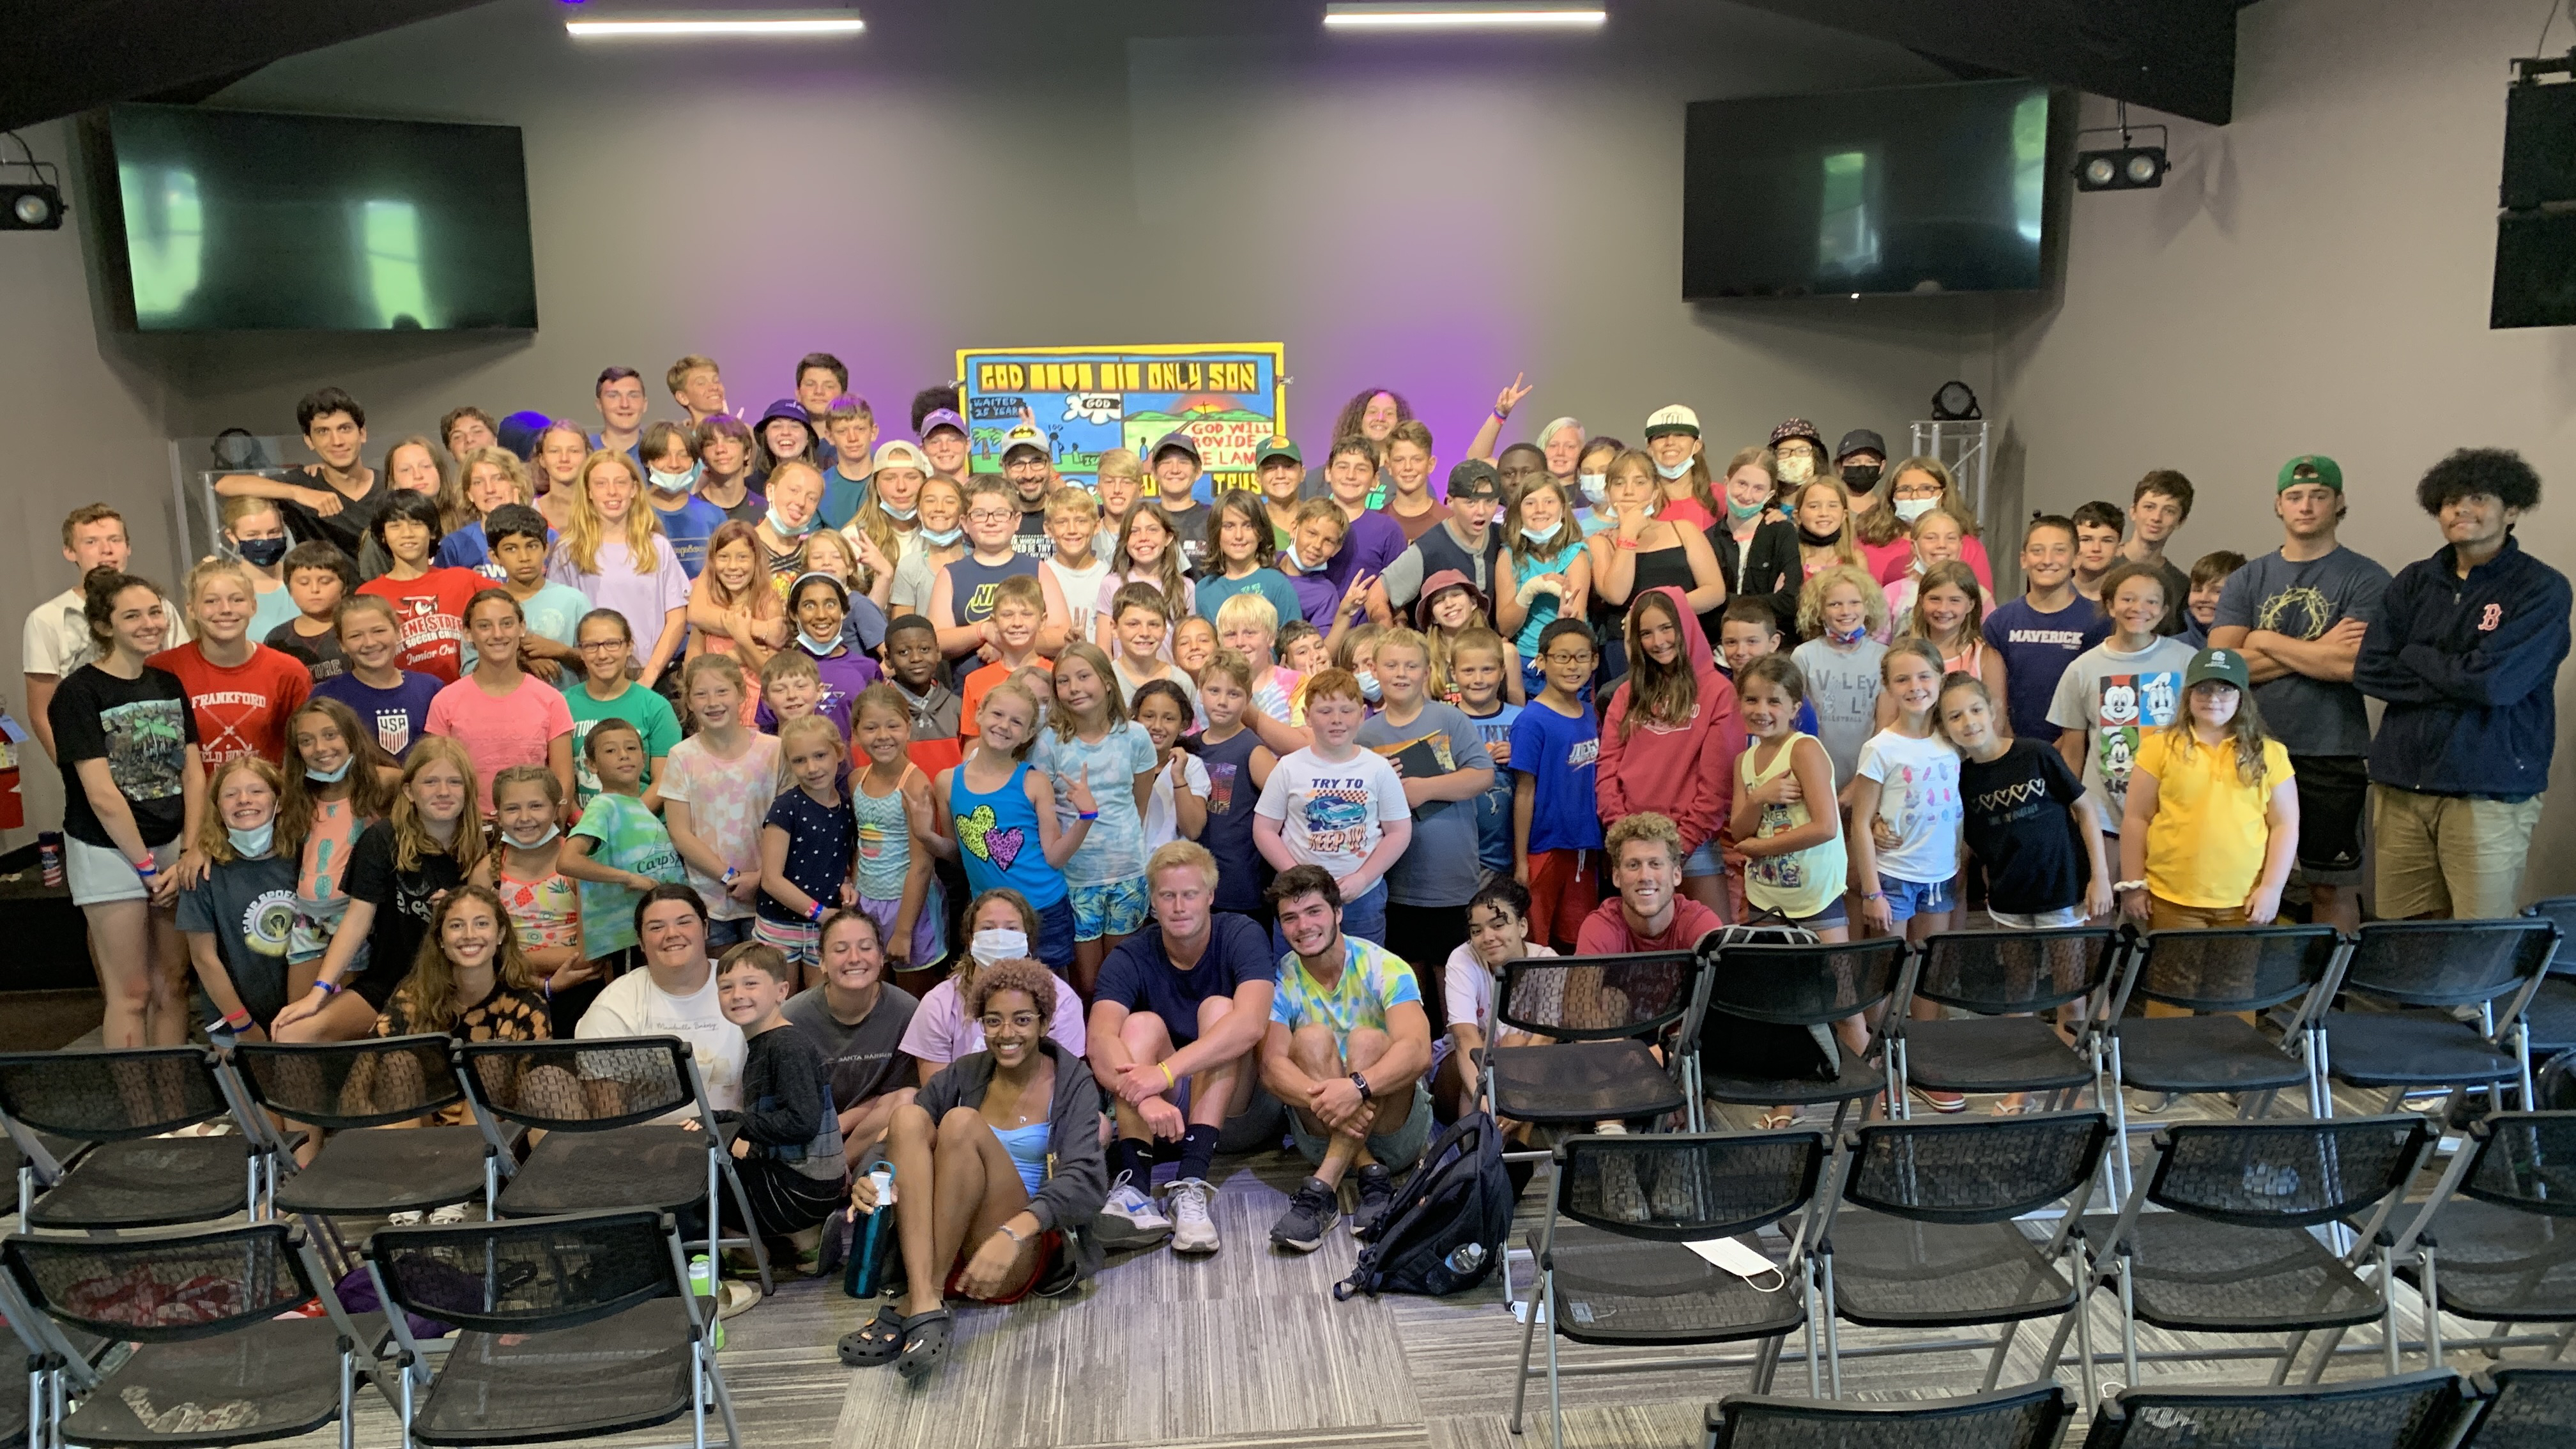 Here are the AMAZING kiddos from Camp Spofford.  They paid attention to the Bible lessons, asked great questions, and were a JOY to work with.  Please be praying for salvations, and that they'd grow in their faith.